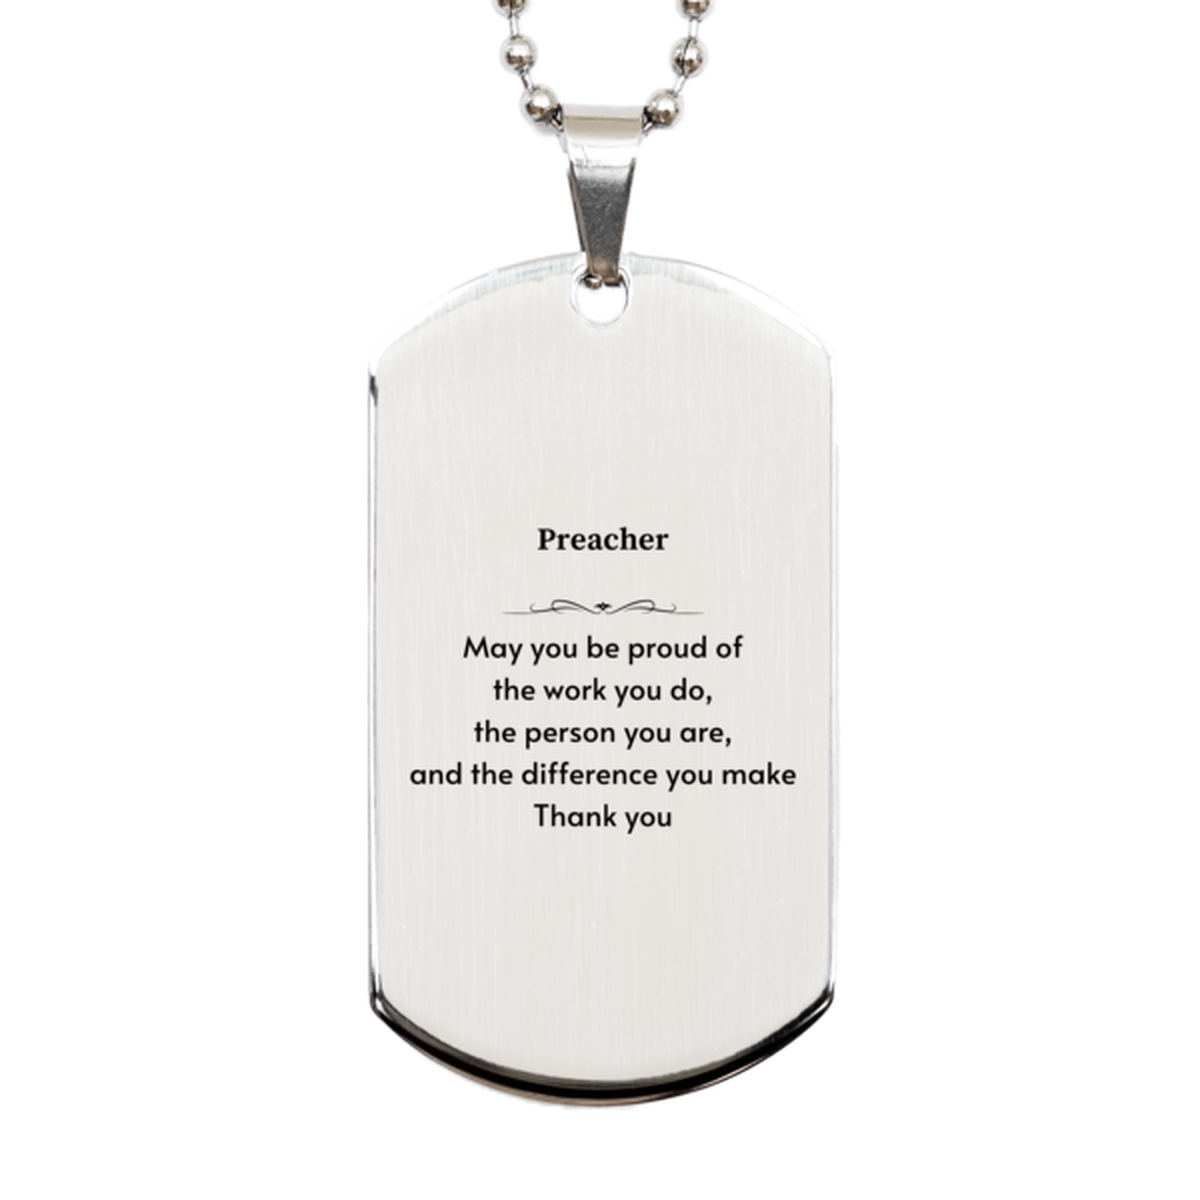 Heartwarming Silver Dog Tag Retirement Coworkers Gifts for Preacher, Preacher May You be proud of the work you do, the person you are Gifts for Boss Men Women Friends